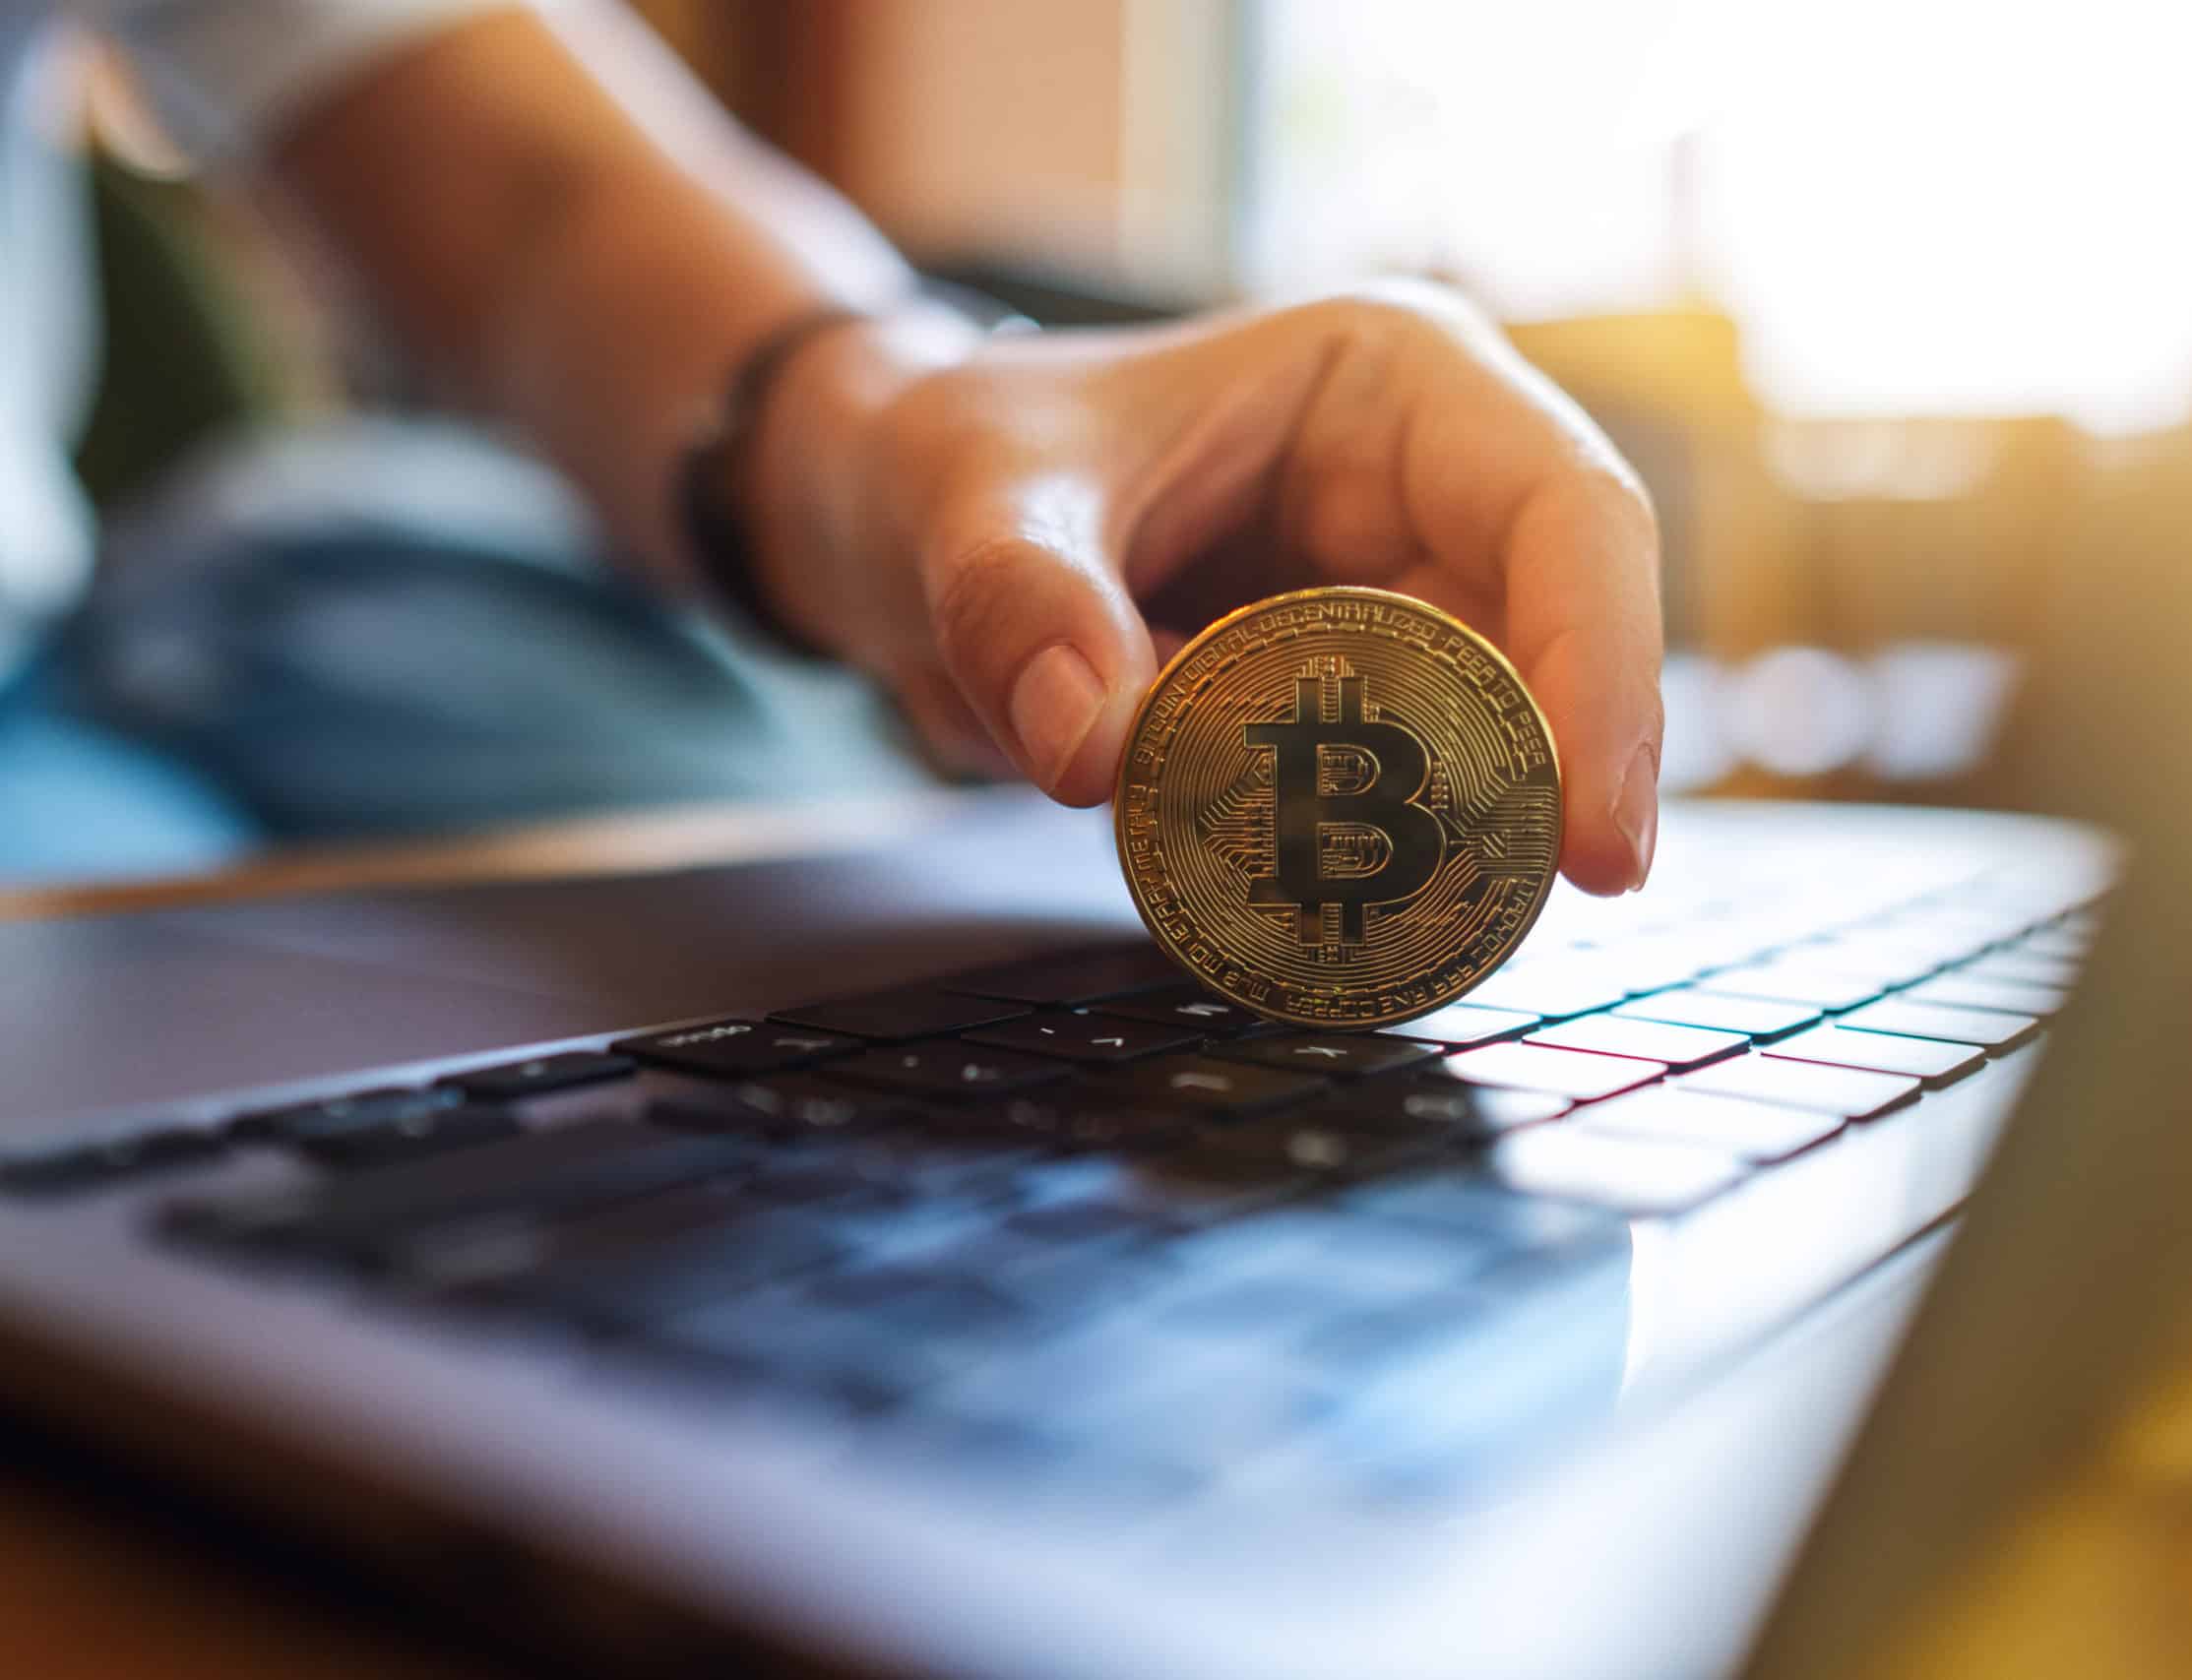 person holding bitcoin on top of laptop keyboard